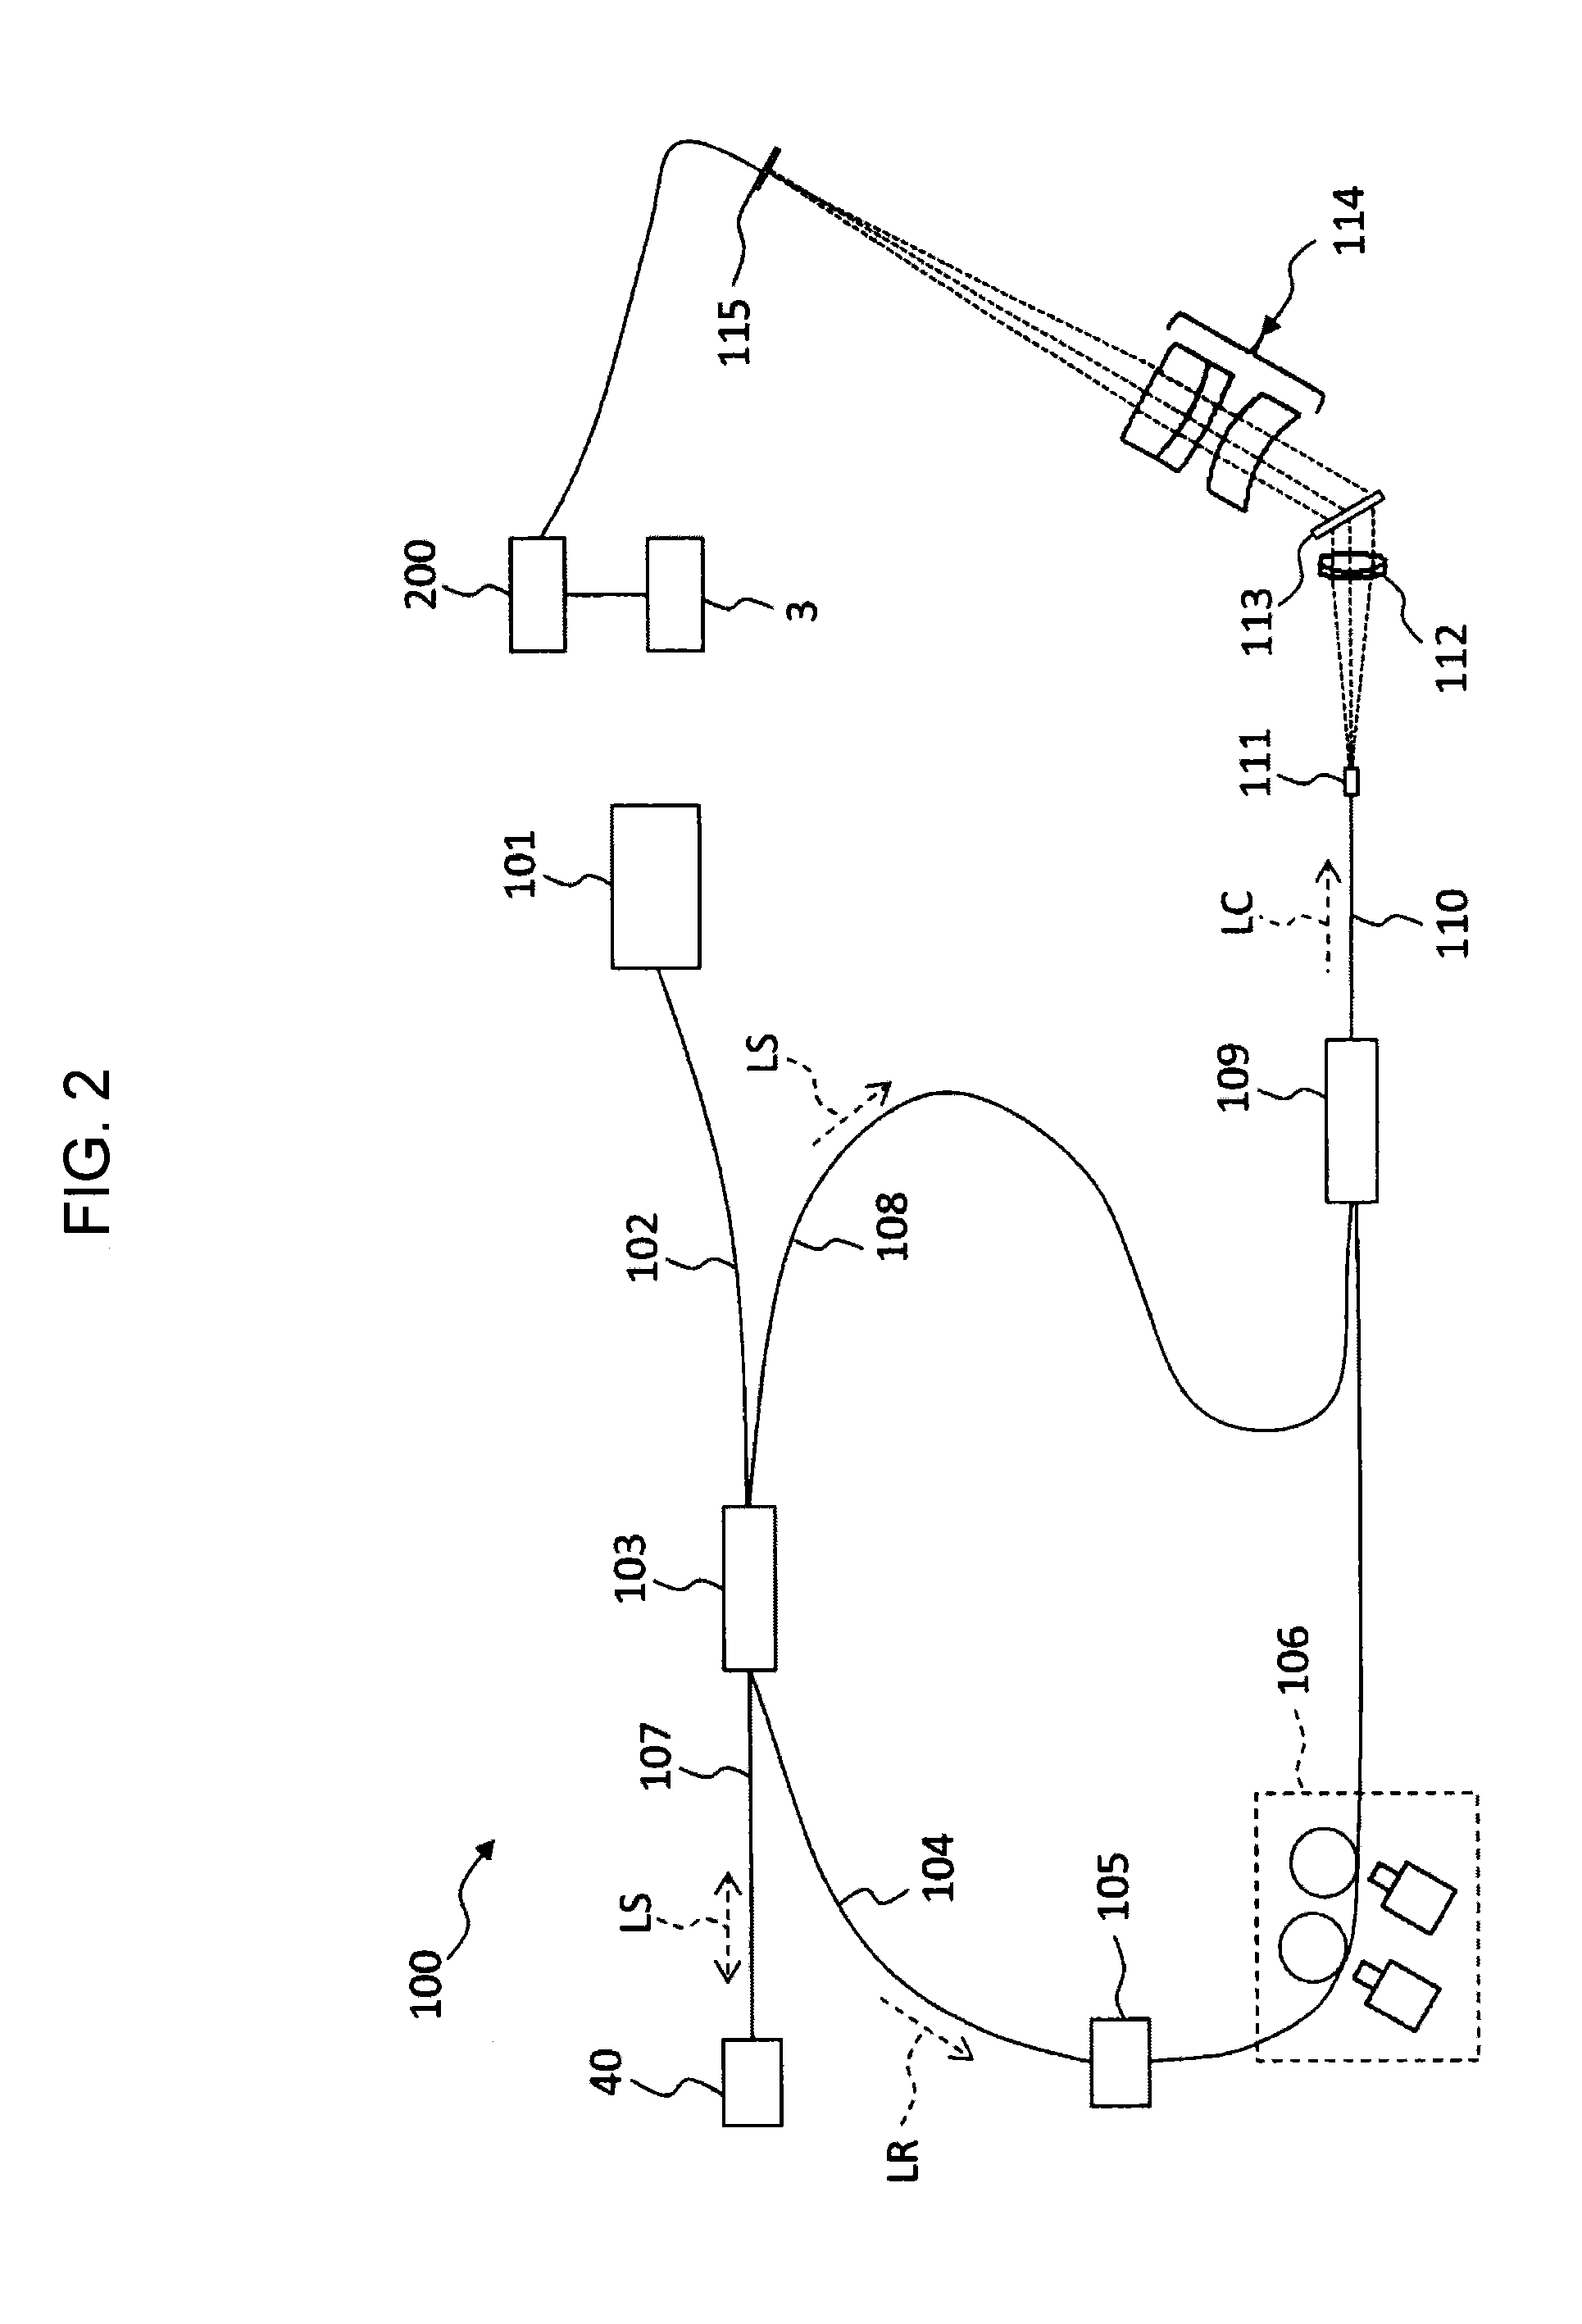 Ophthalmologic imaging apparatus and ophthalmologic image processing apparatus